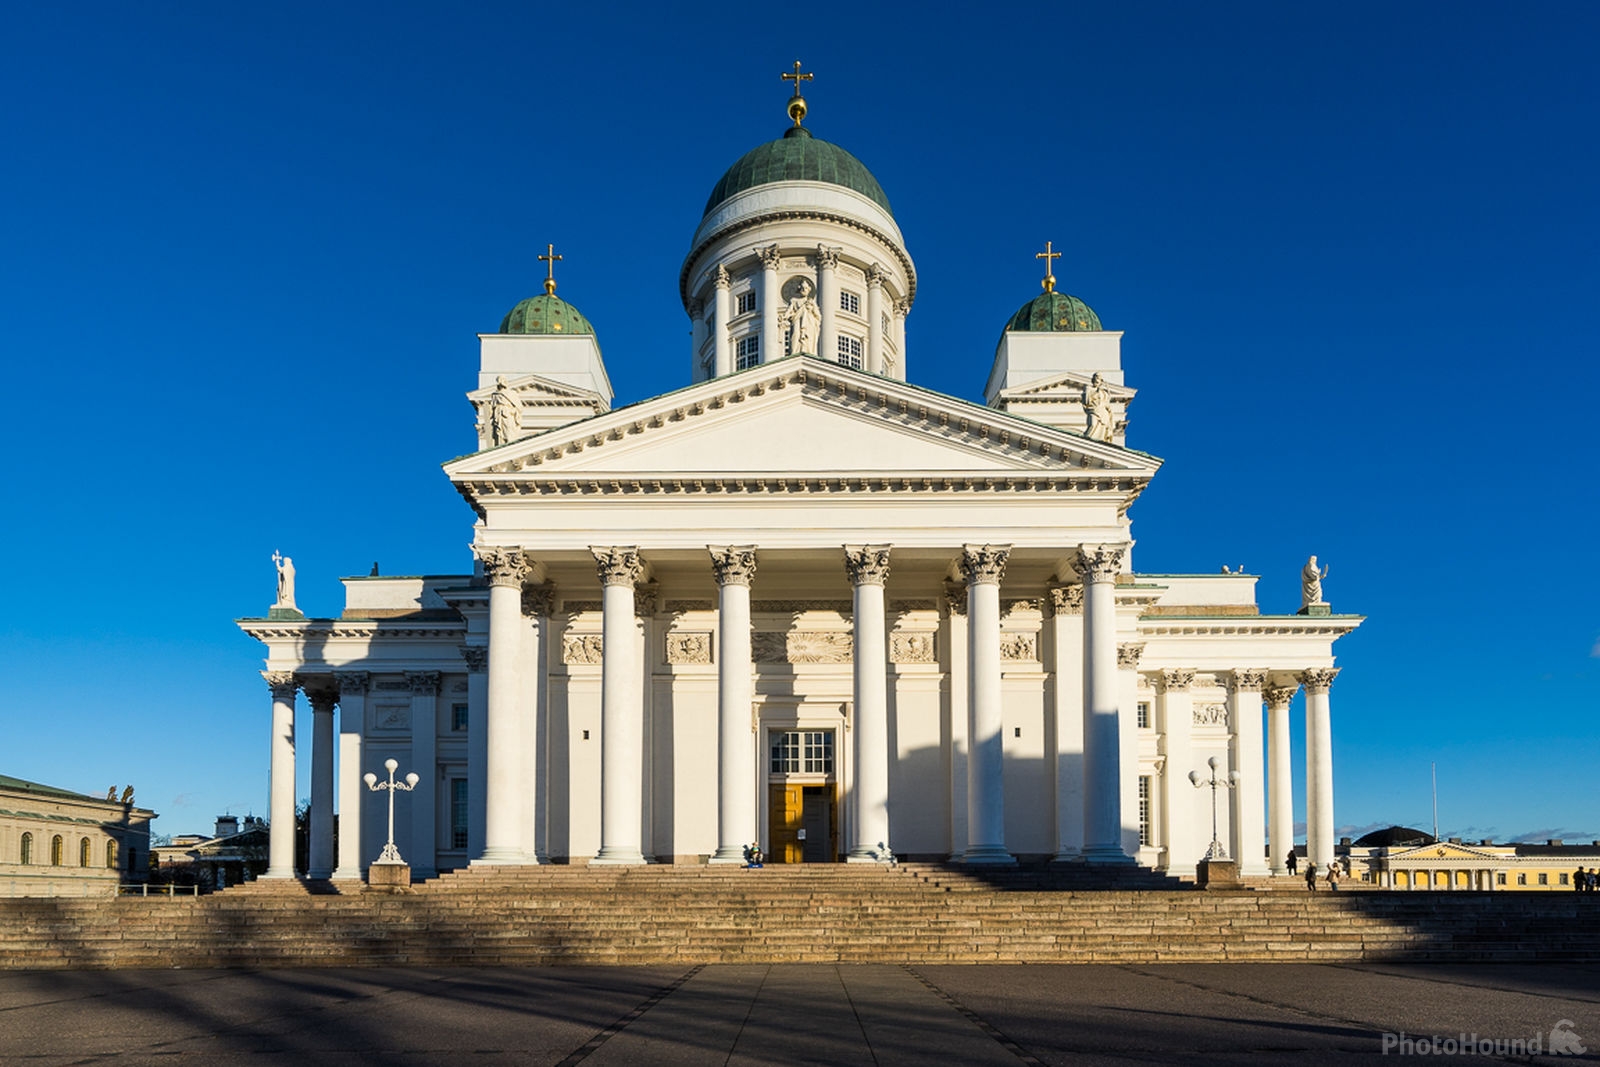 Image of Helsinki Cathedral by James Billings.